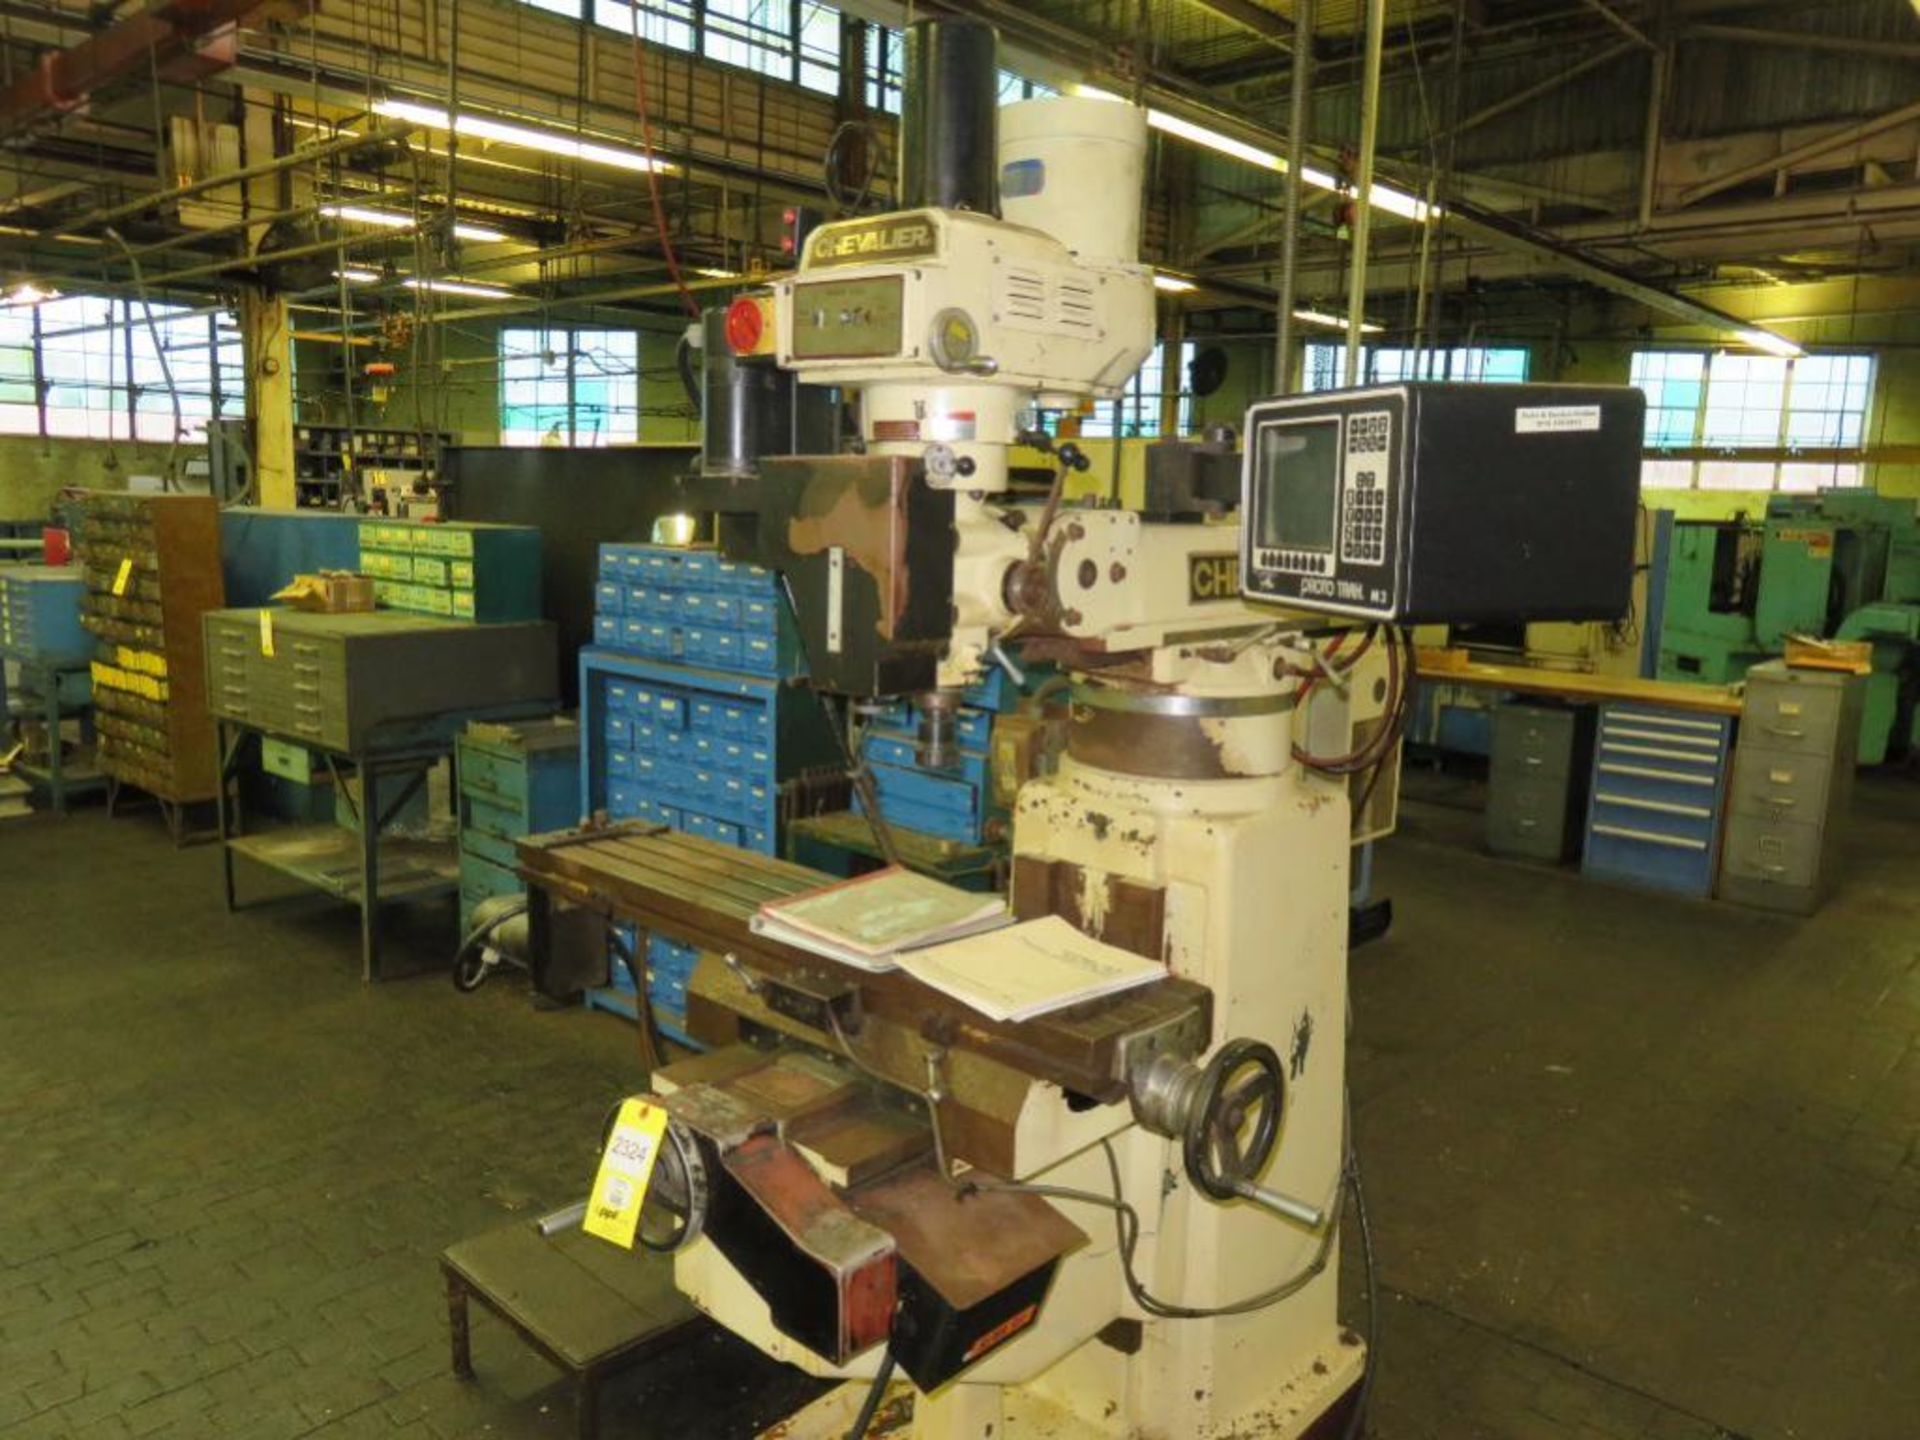 Chevalier 3 HP CNC Variable Speed Vertical Mill Model FM-32HP, S/N HP874002 (Location H)